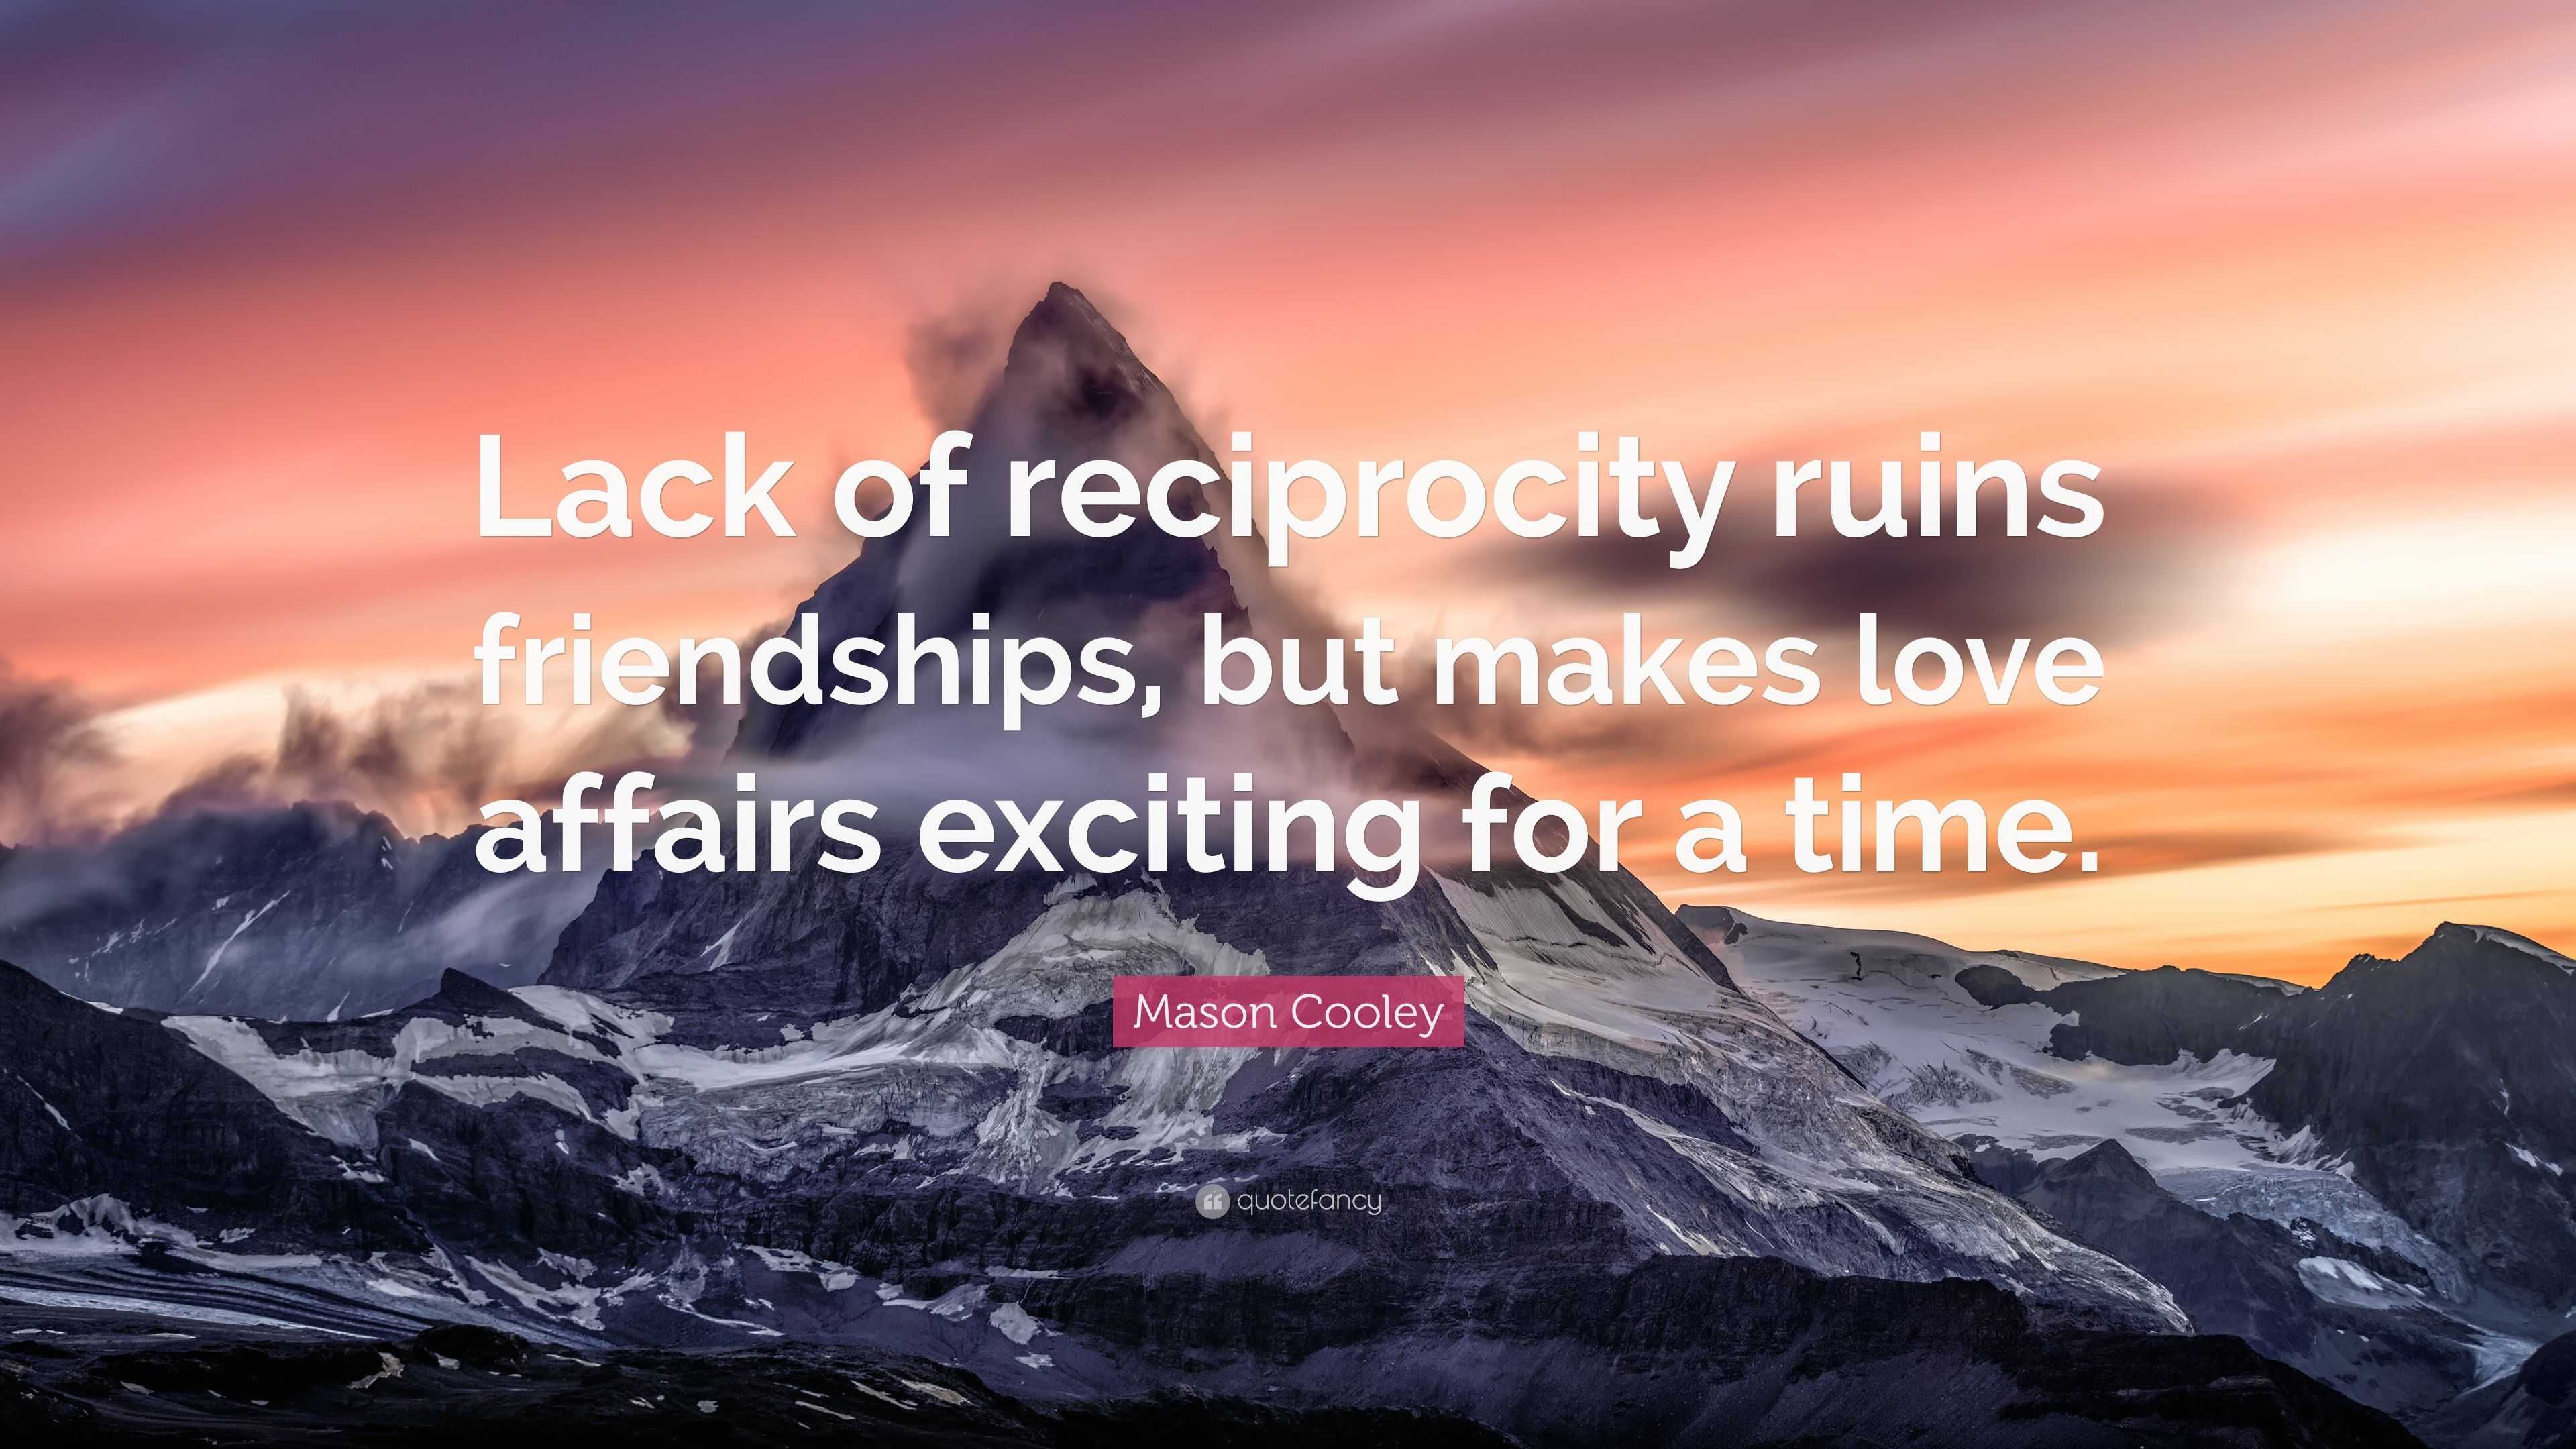 Mason Cooley Quote “Lack of reciprocity ruins friendships but makes love affairs exciting